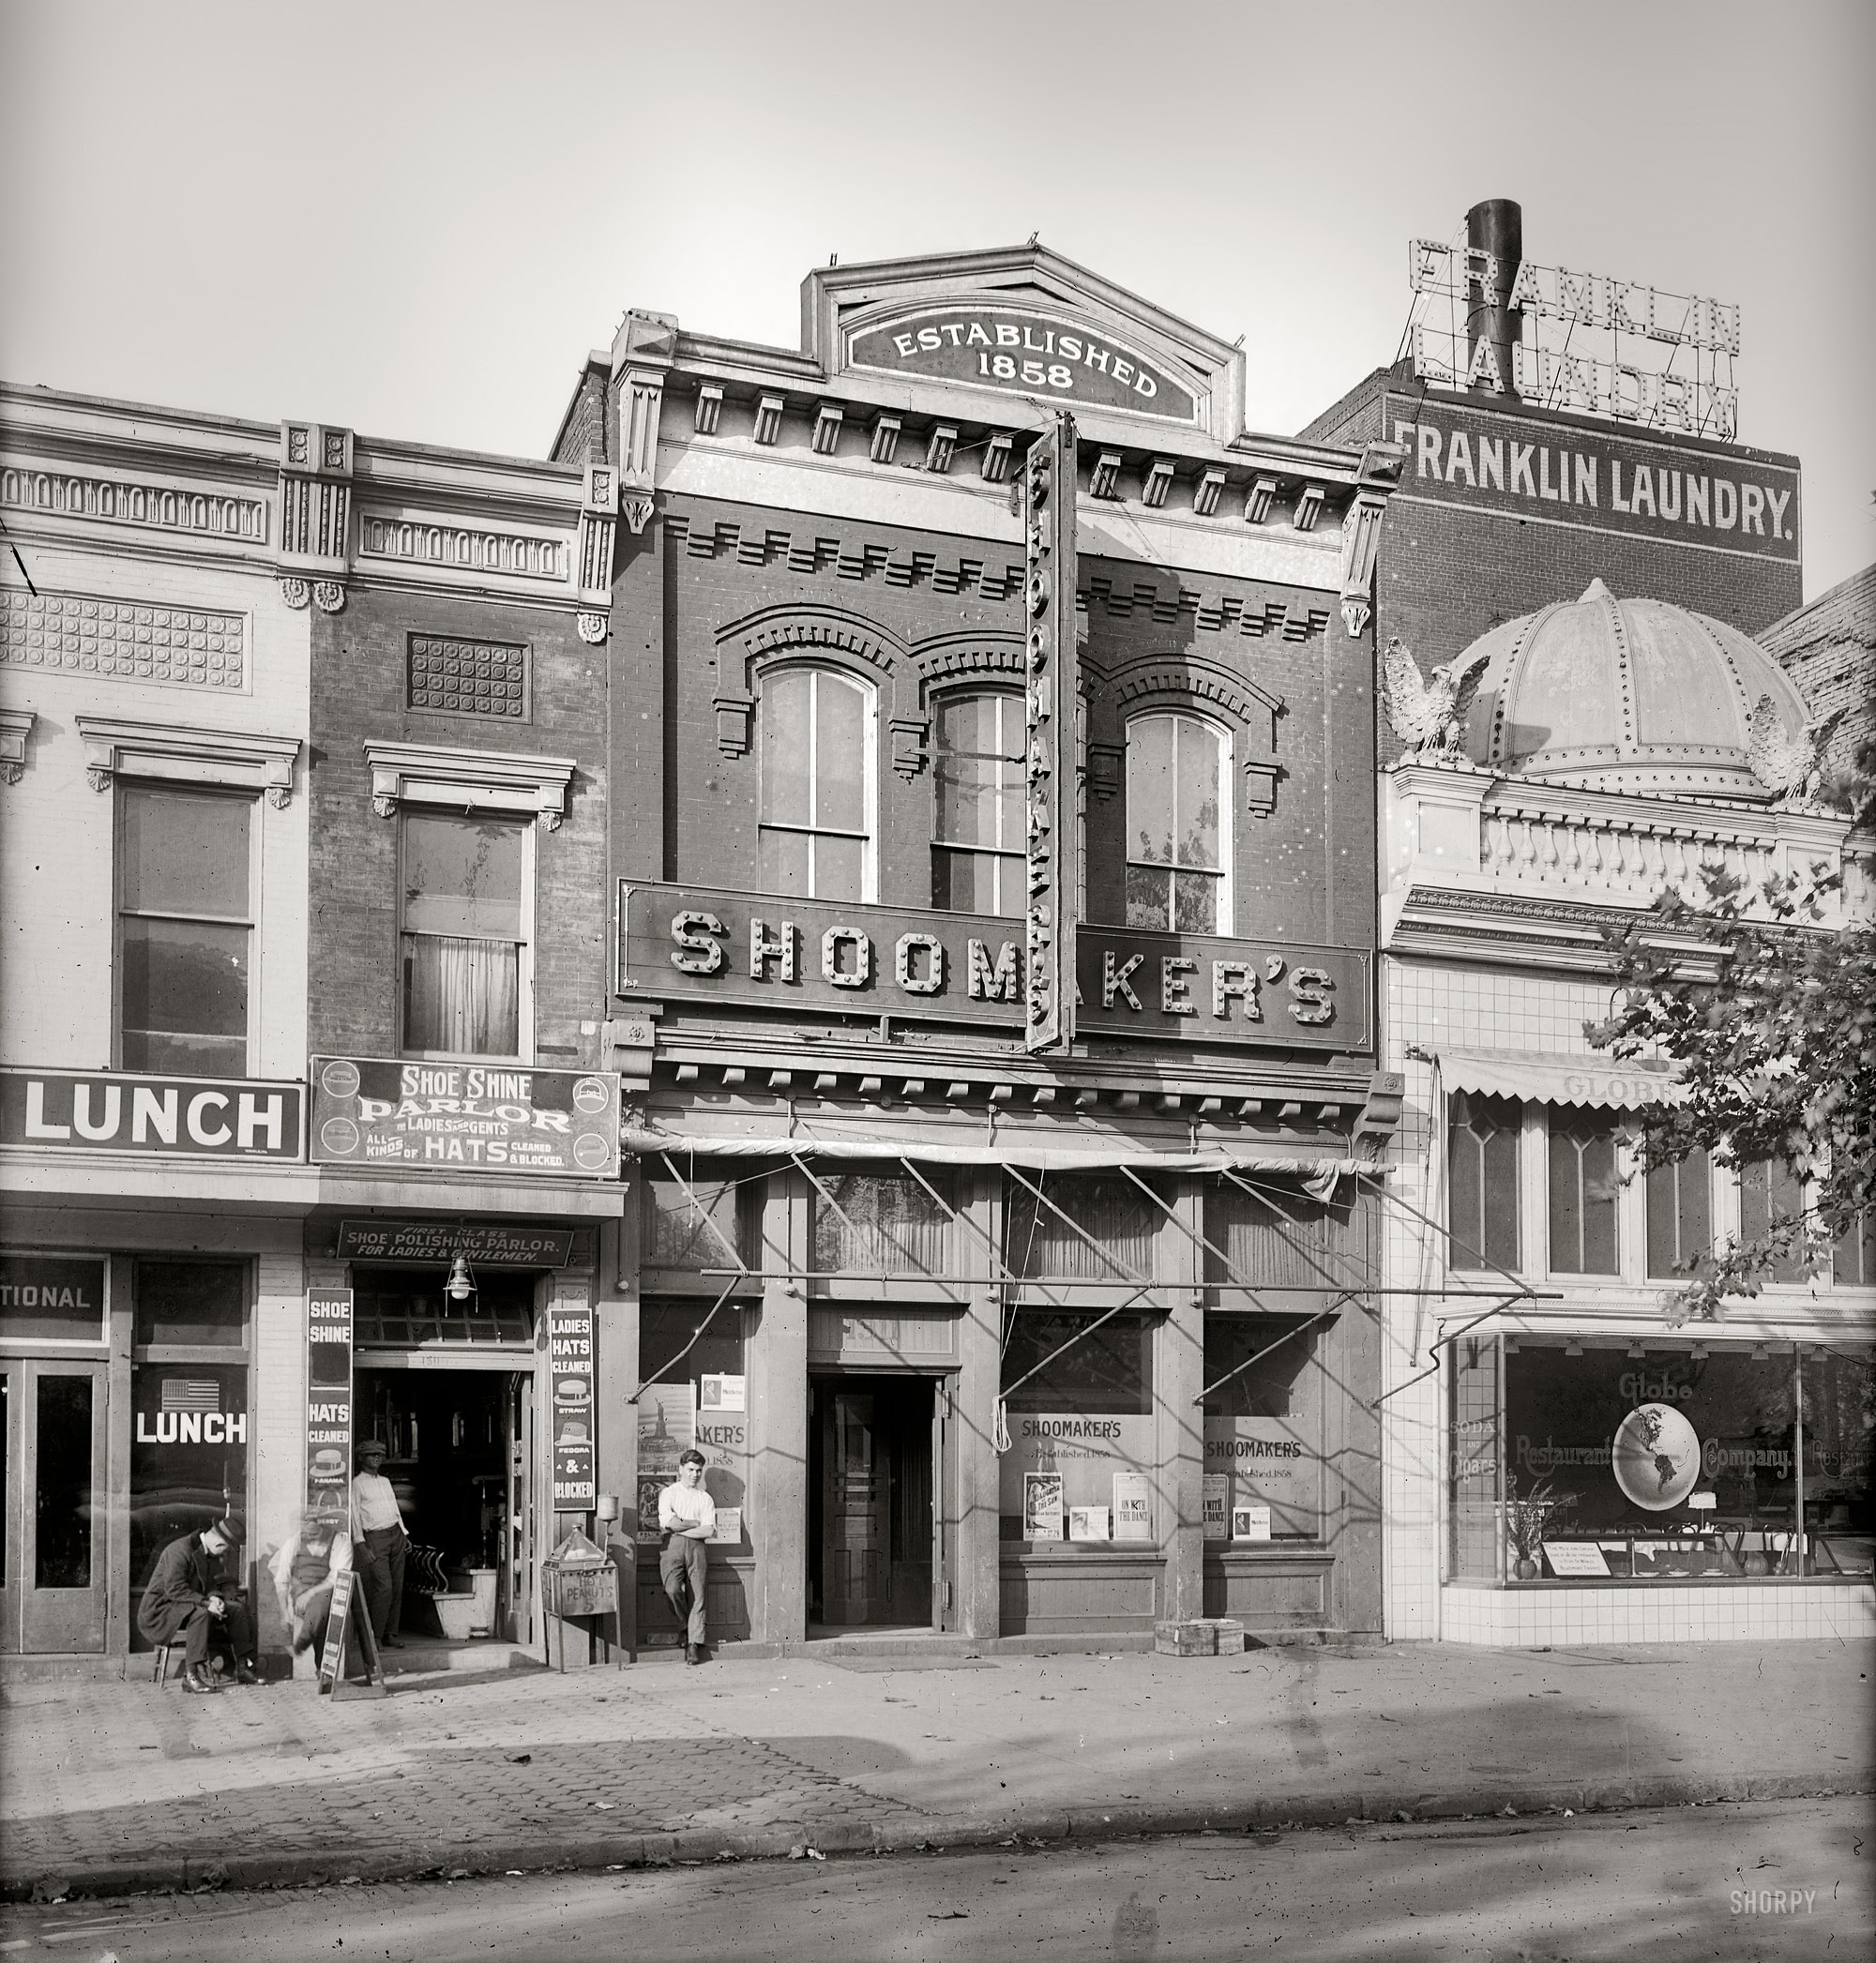 Washington circa 1917. Shoomaker's saloon at 1311 E Street N.W. after having moved from 1331 E Street in late 1914.  National Photo Company glass negative. View full size. Thanks to Quondam Washington for the inspiration.